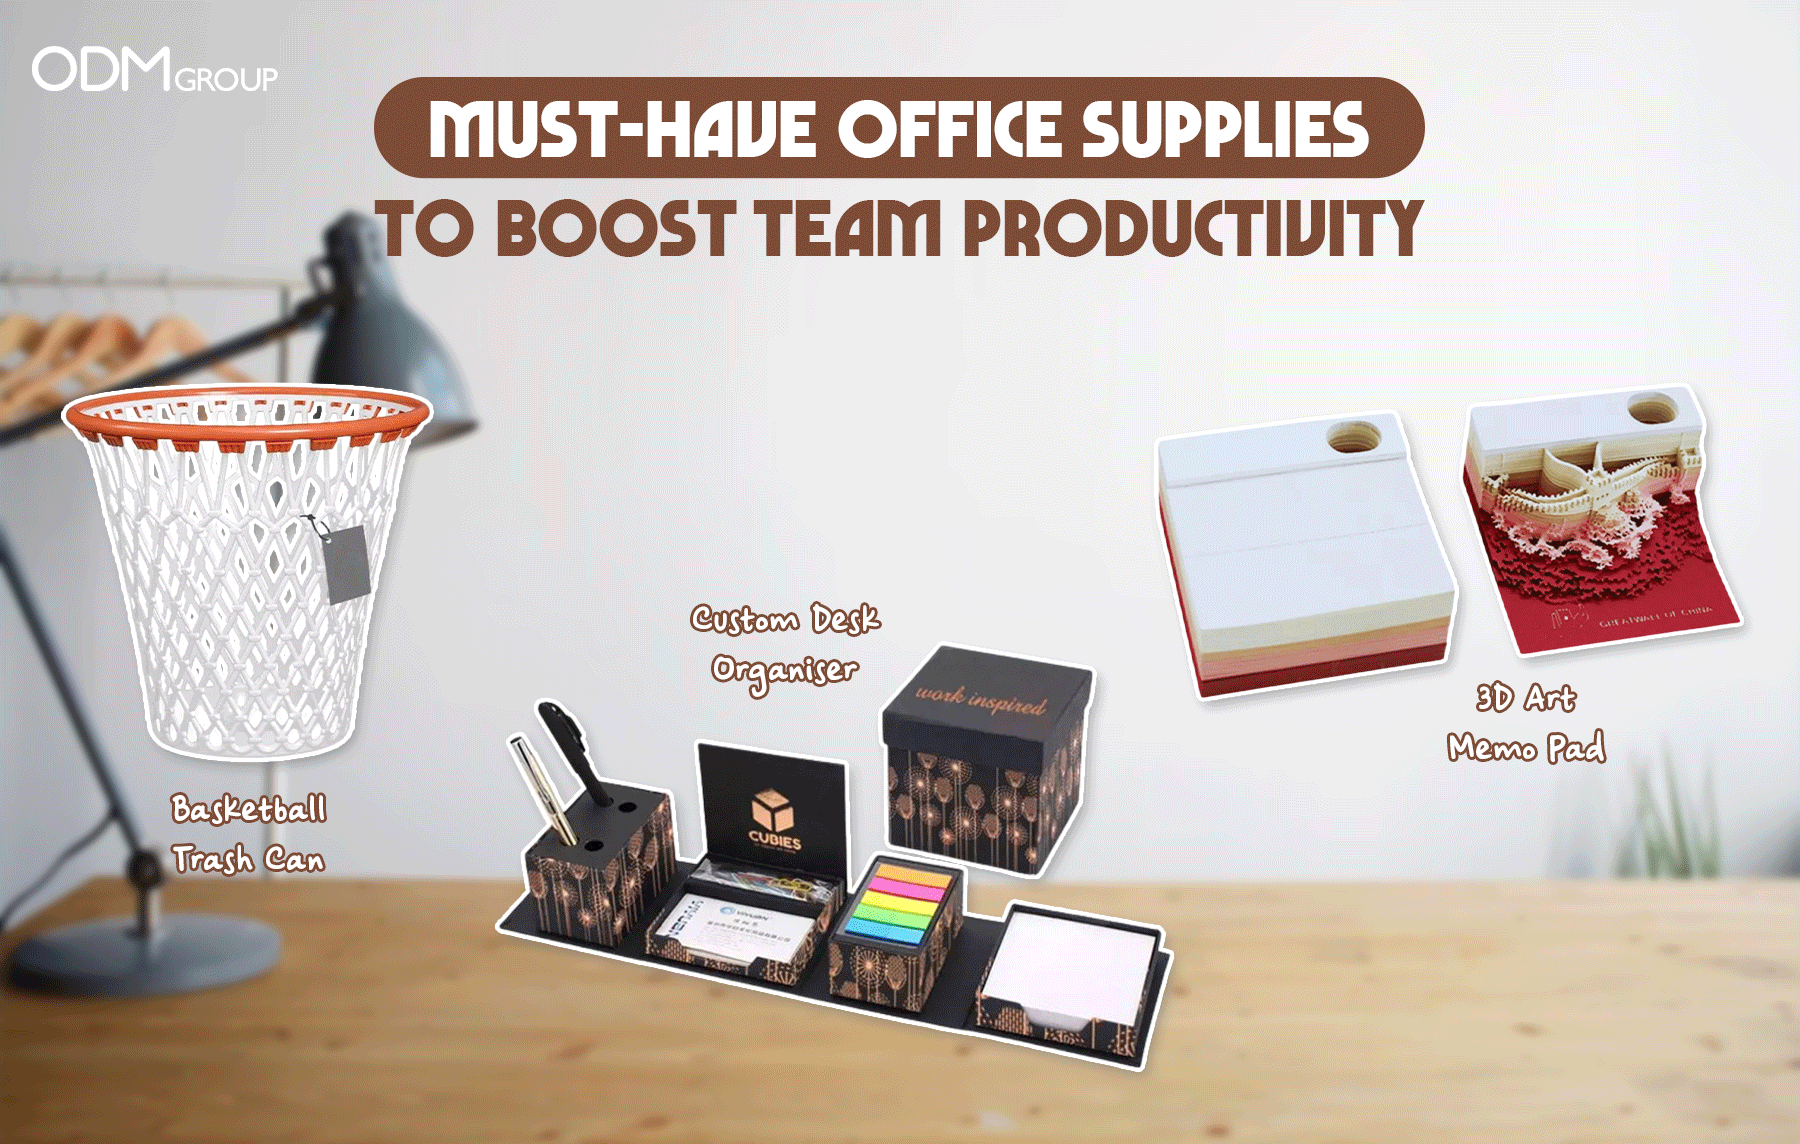 Various office supplies including a basketball trash can, desk organizer, and 3D memo pads by ODM Group.